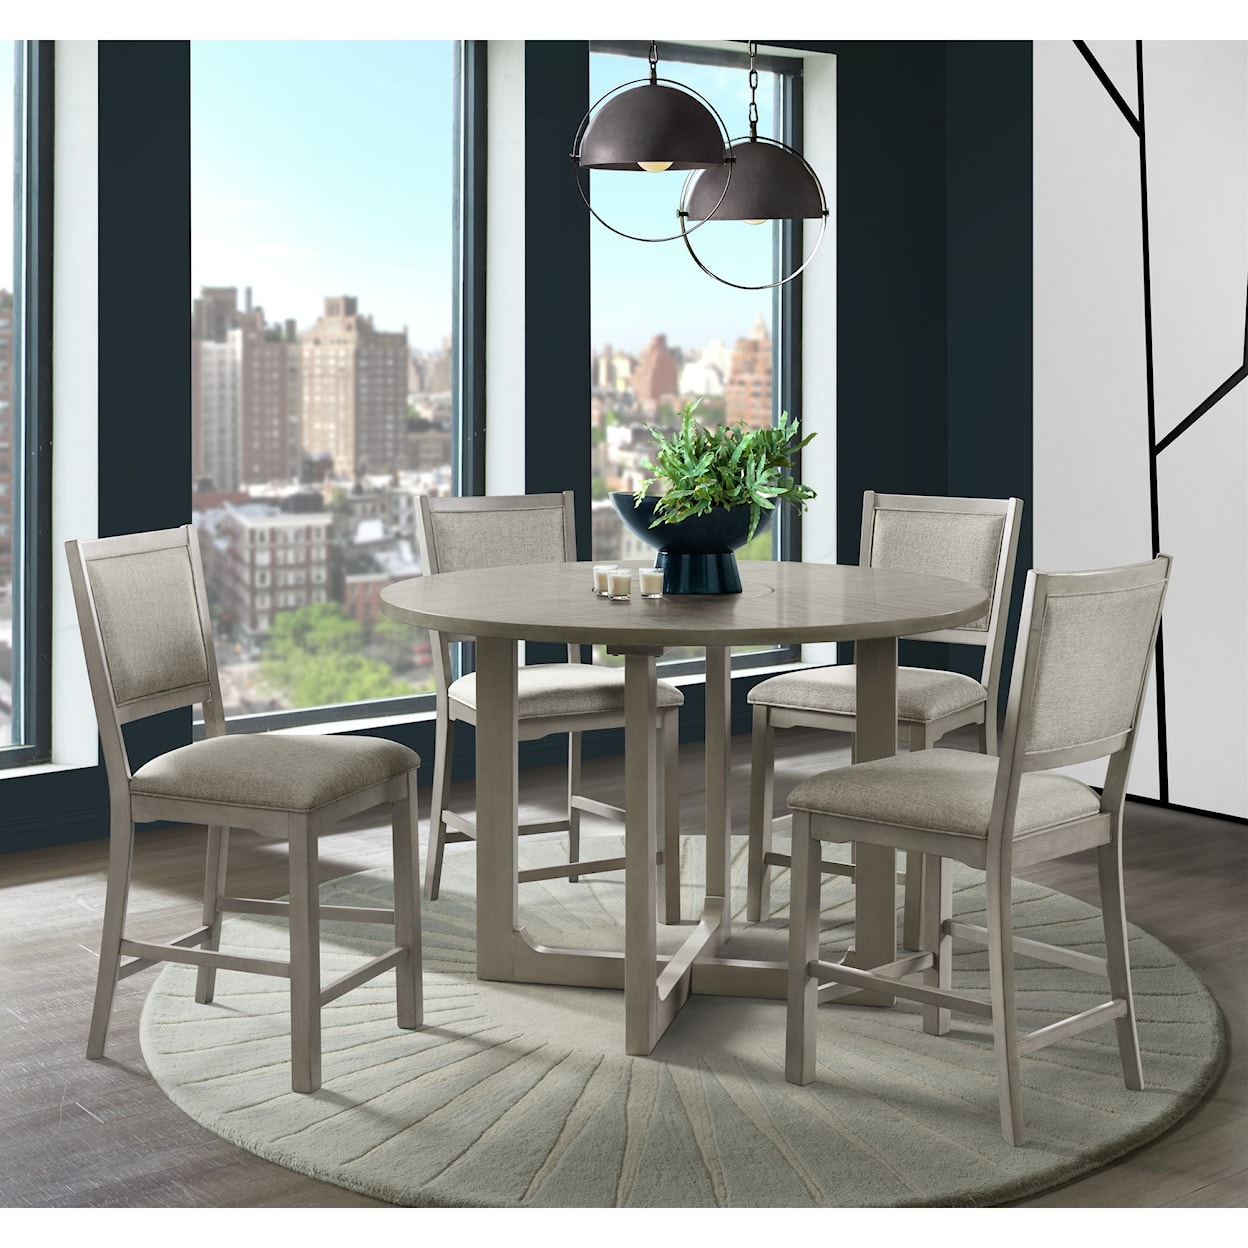 Elements International Marly 5-Piece Counter Height Dining Set